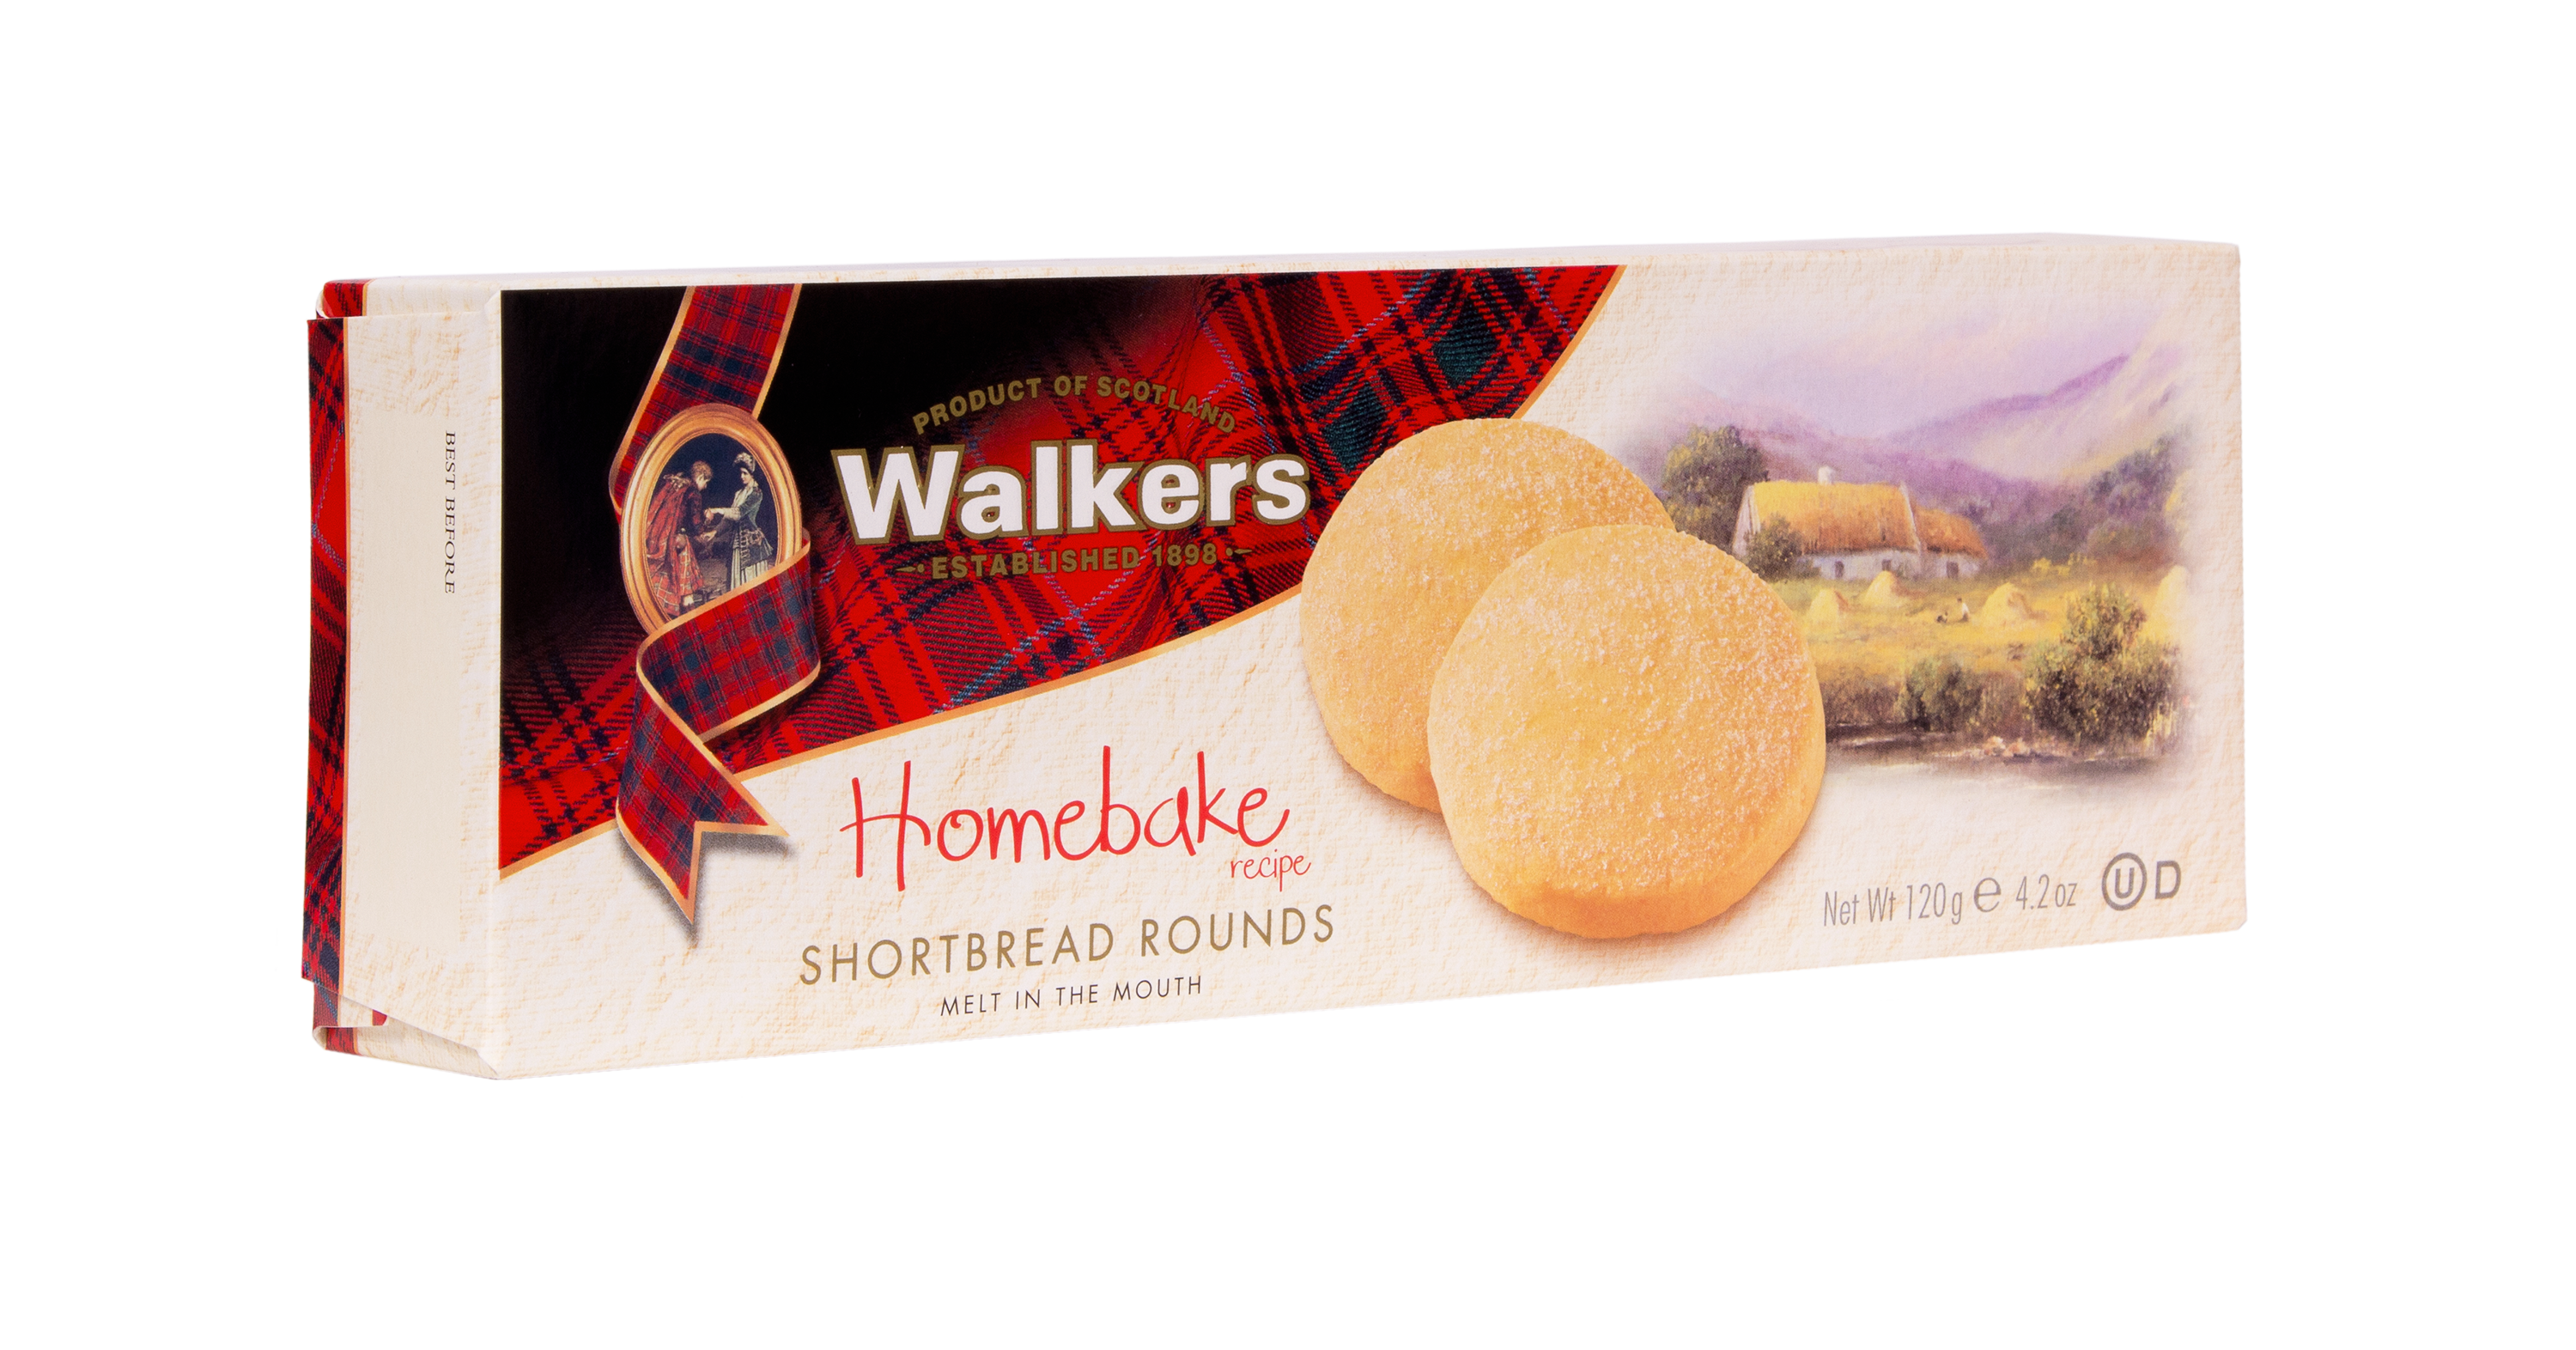 Walkers named this product, “Homebake” because that's exactly how it tastes